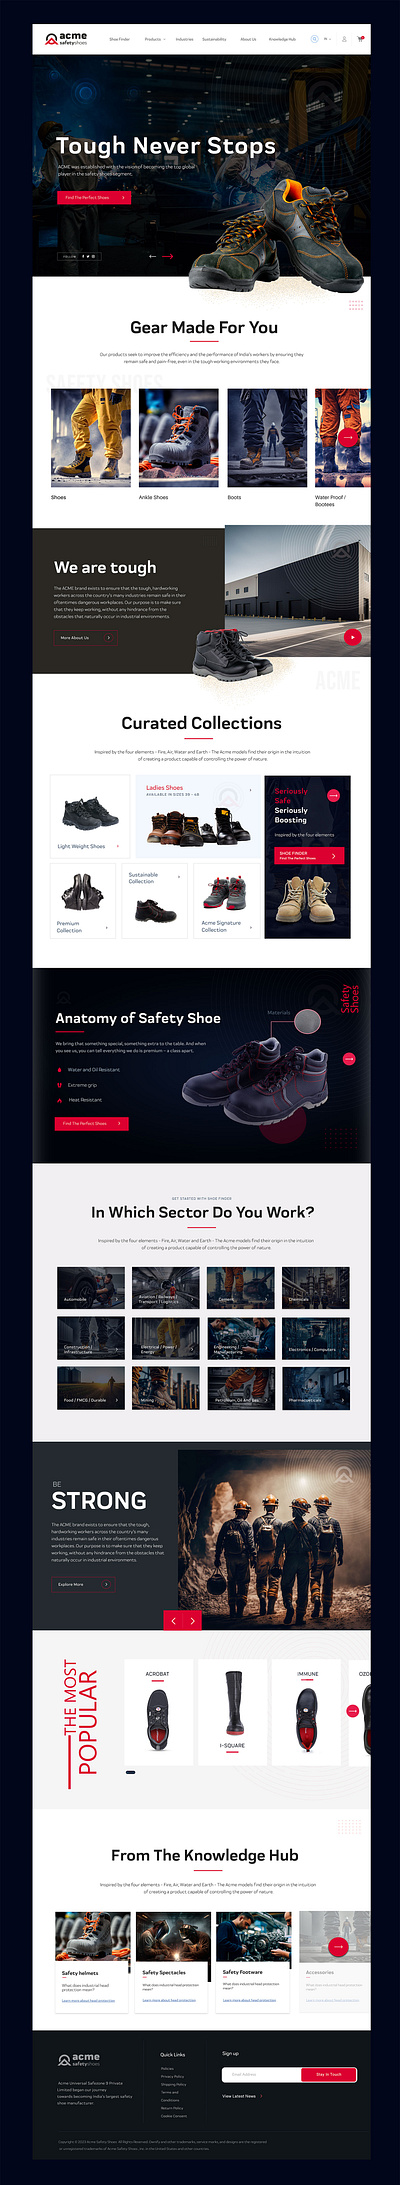 Safety Shoe Company Homepage Design branding graphic design homepage homepage design safety shoes shoes ui